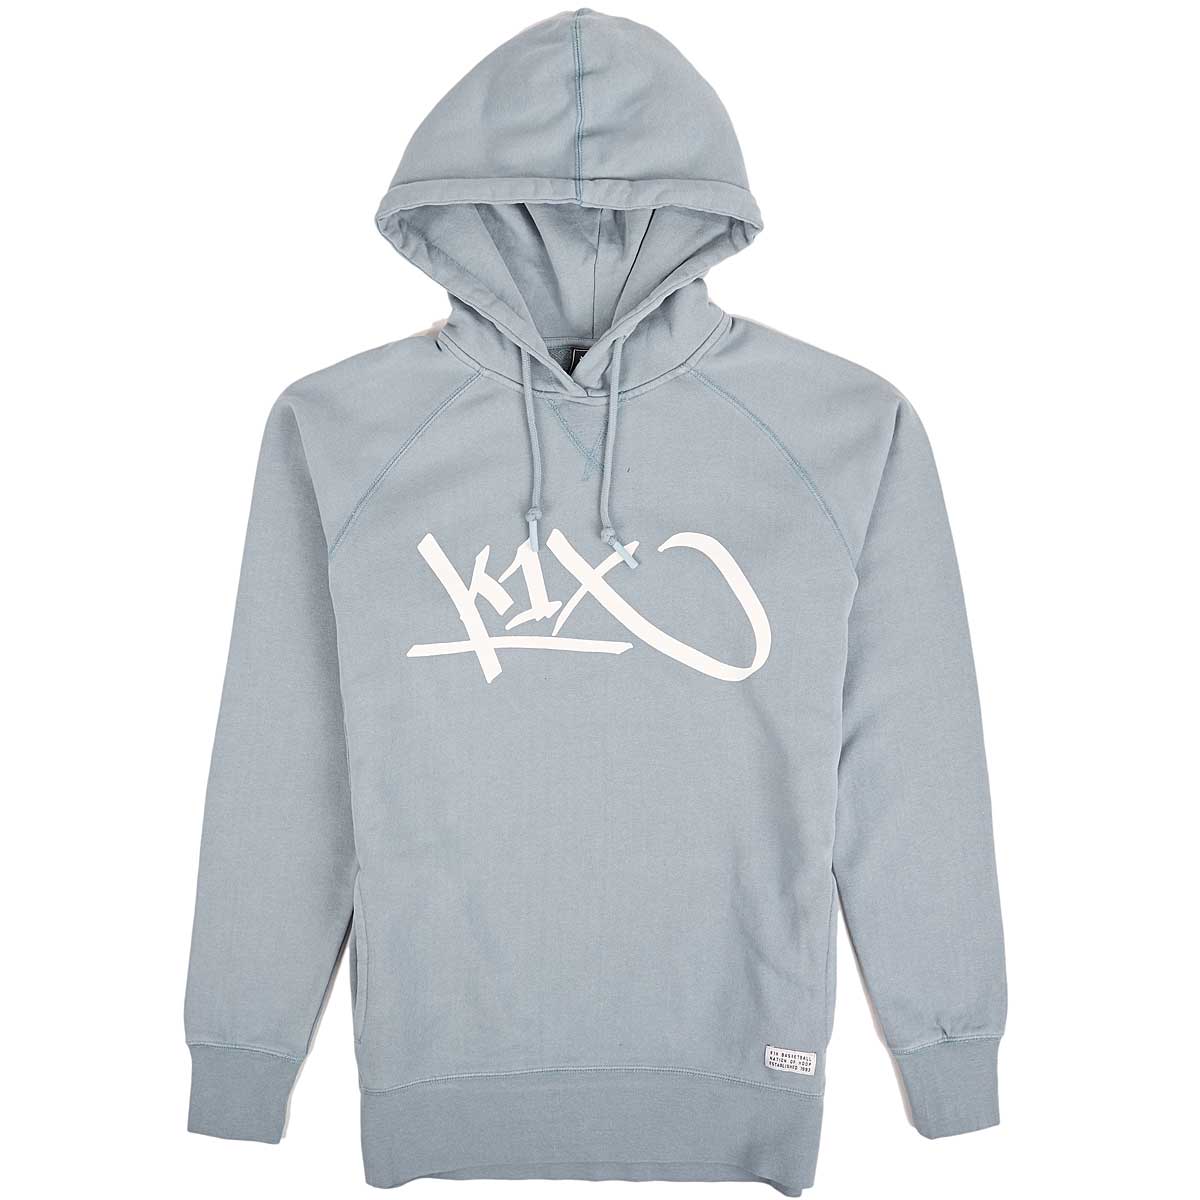 K1X Washed Authentic Hoody, Citadel